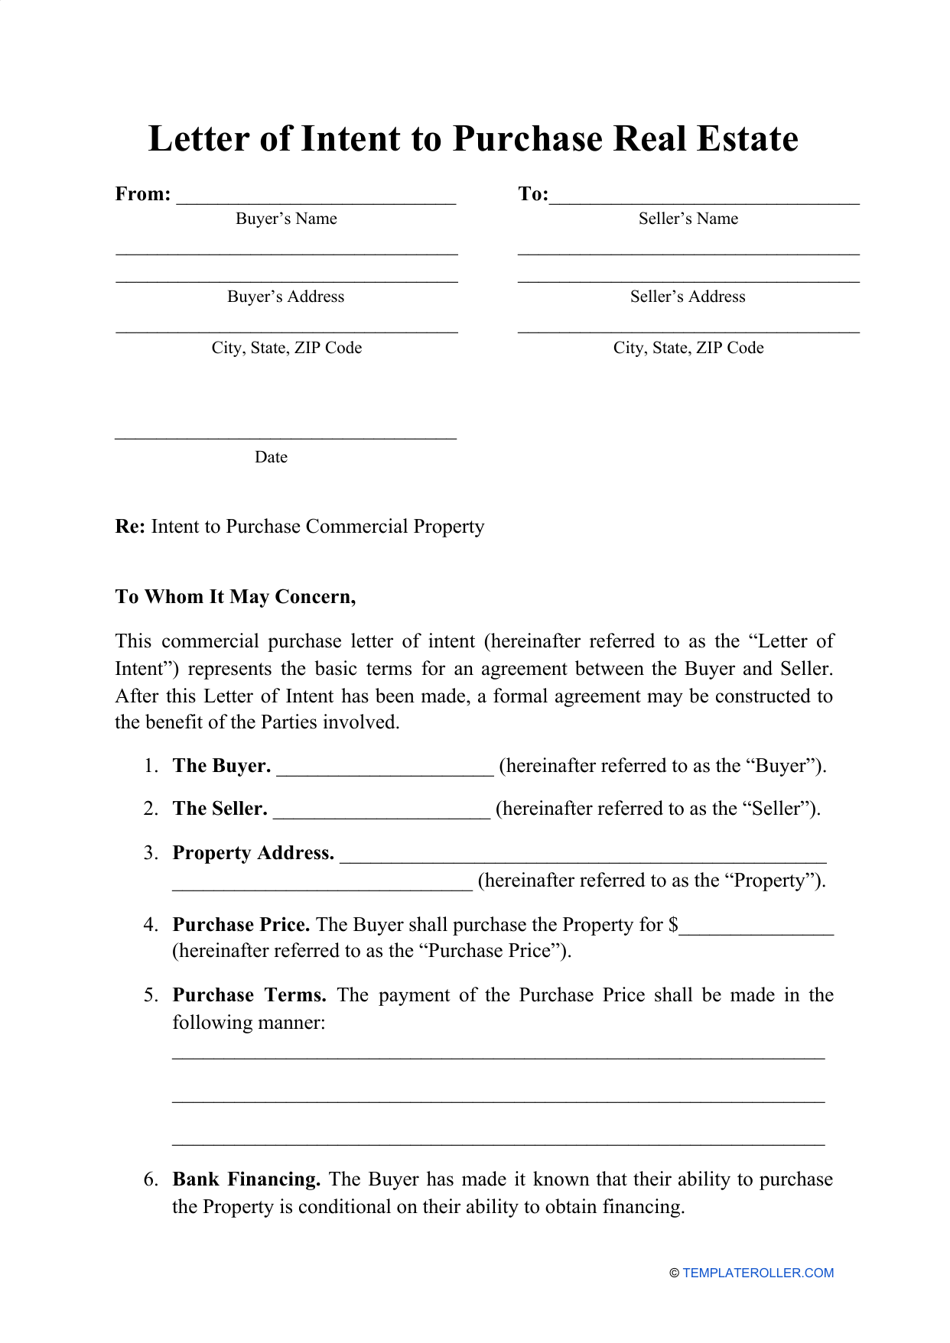 Letter of Intent to Purchase Real Estate Template, Page 1